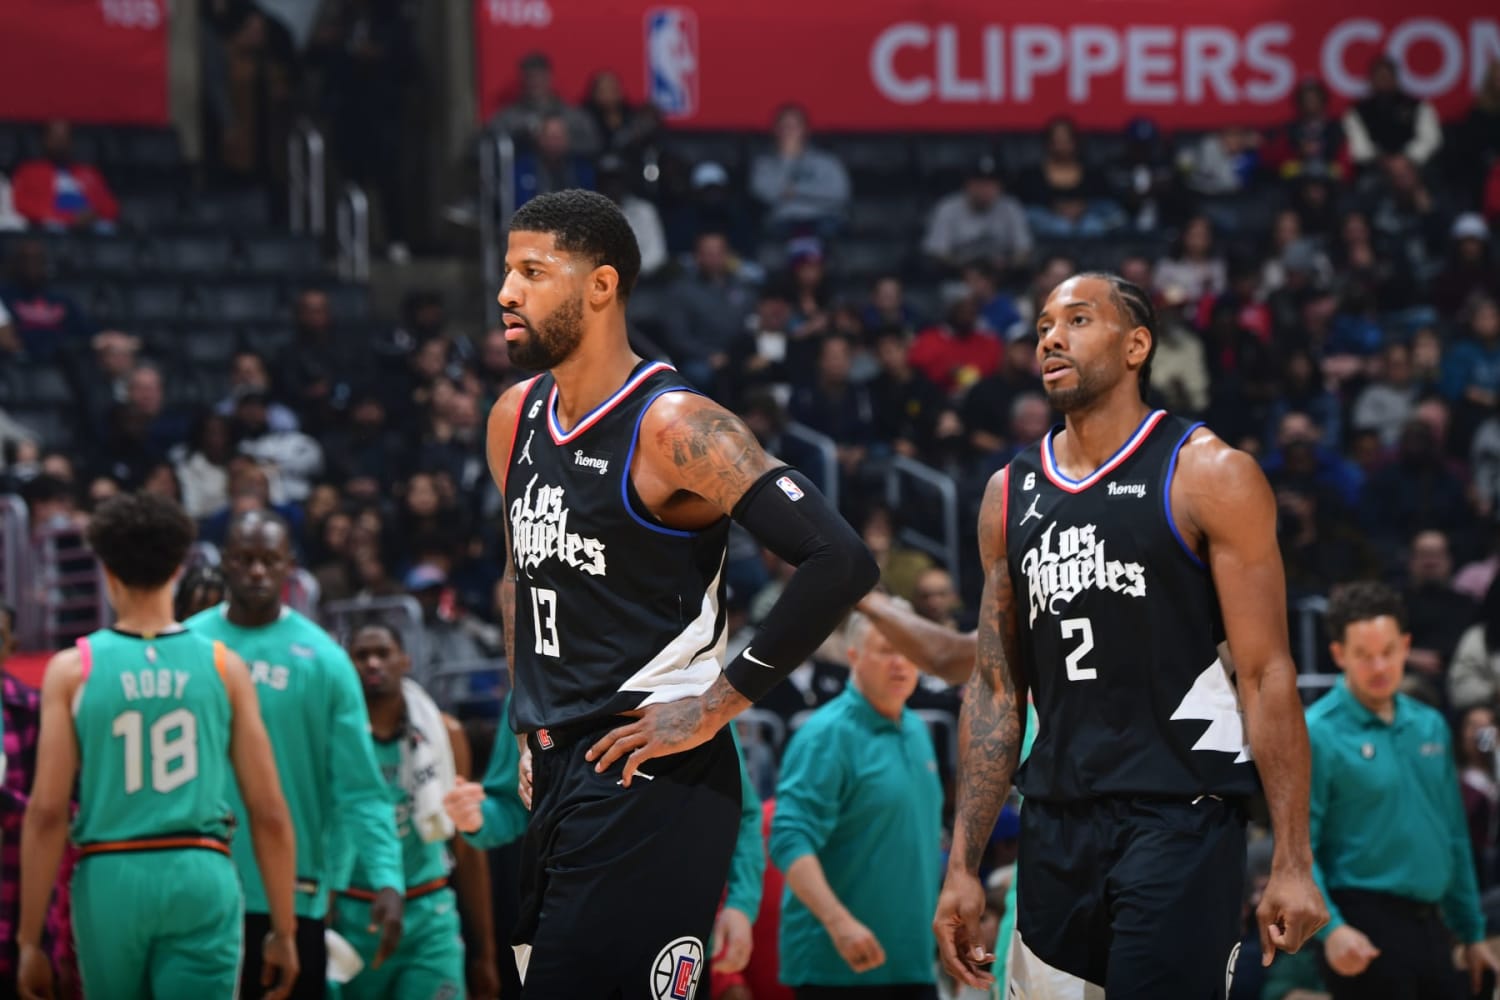 Report: Timberwolves were willing to offer more than Clippers for Bones  Hyland, but Nuggets ownership didn't want to help Minnesota - Ahn Fire  Digital